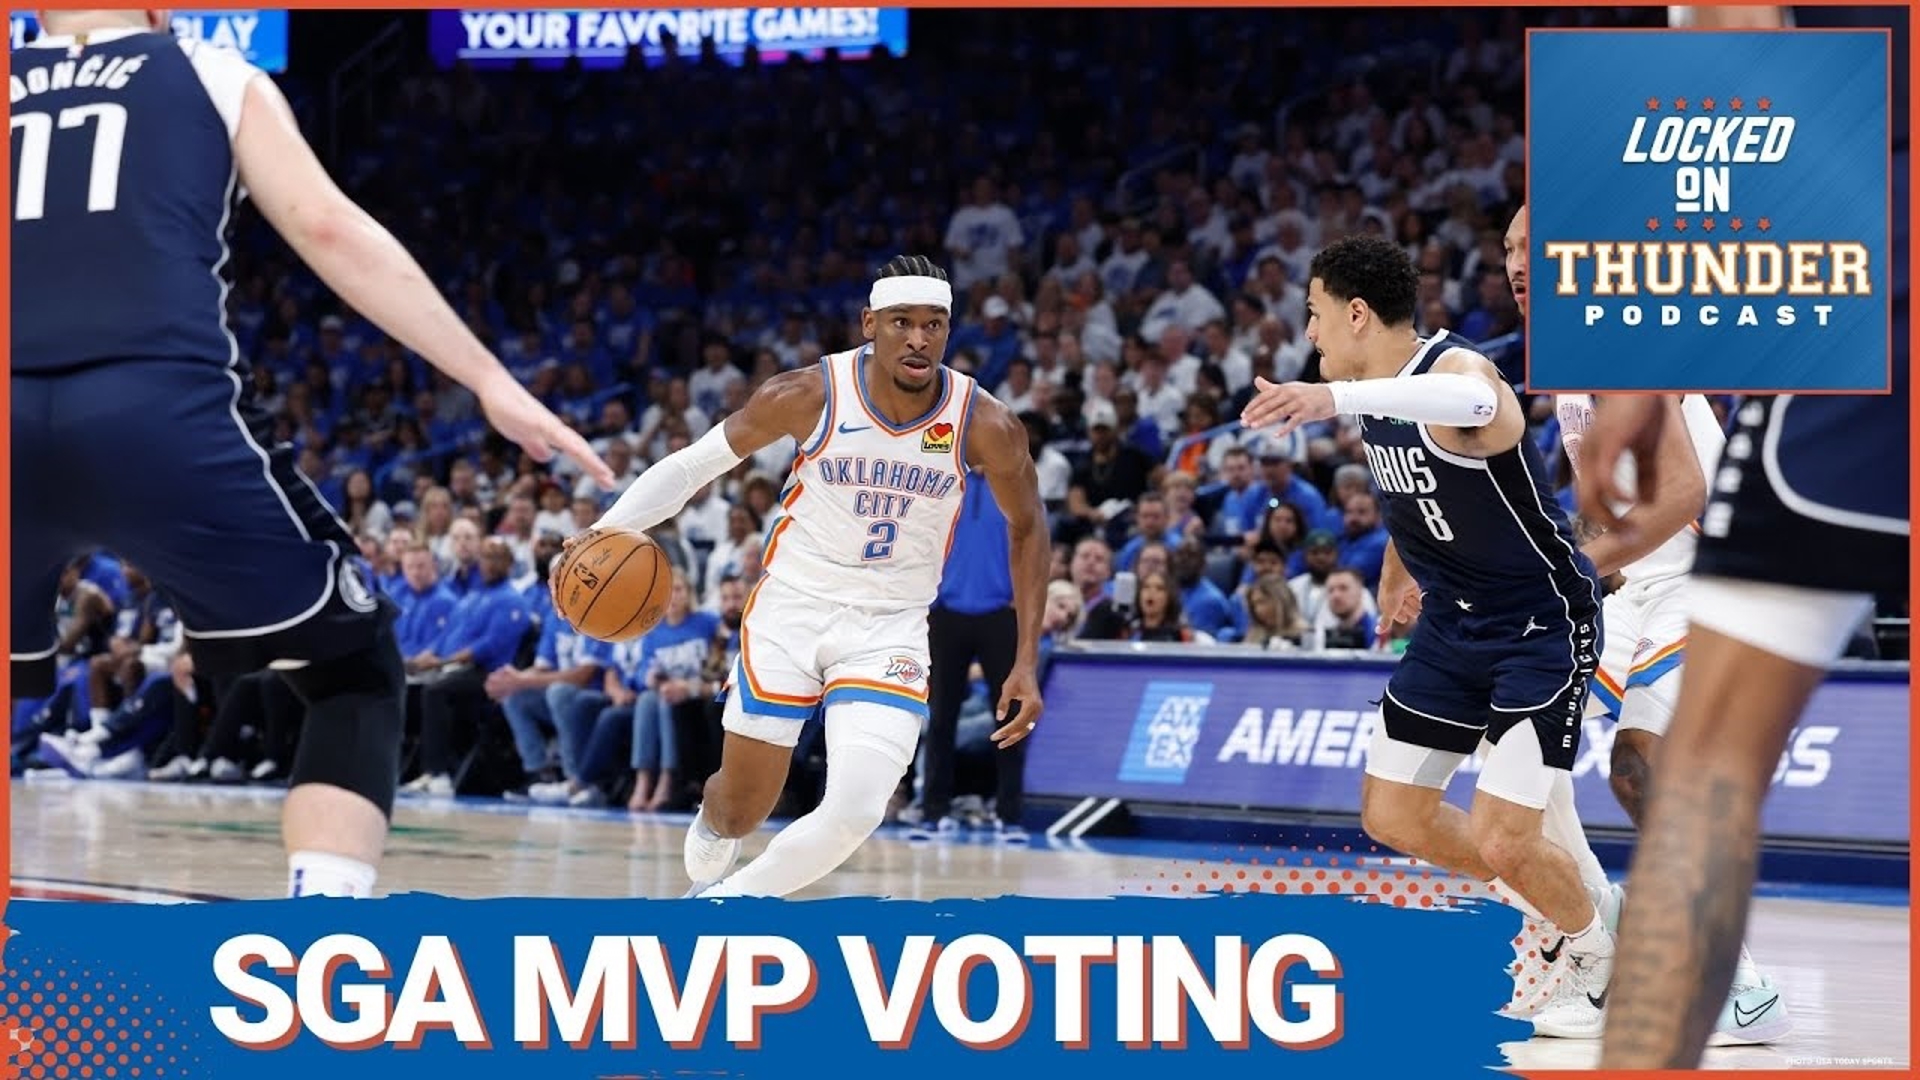 The Oklahoma City Thunder earned a dominating Game 1 victory over the Dallas Mavericks, what adjustments can the OKC Thunder and Dallas Mavericks make in Game 2?